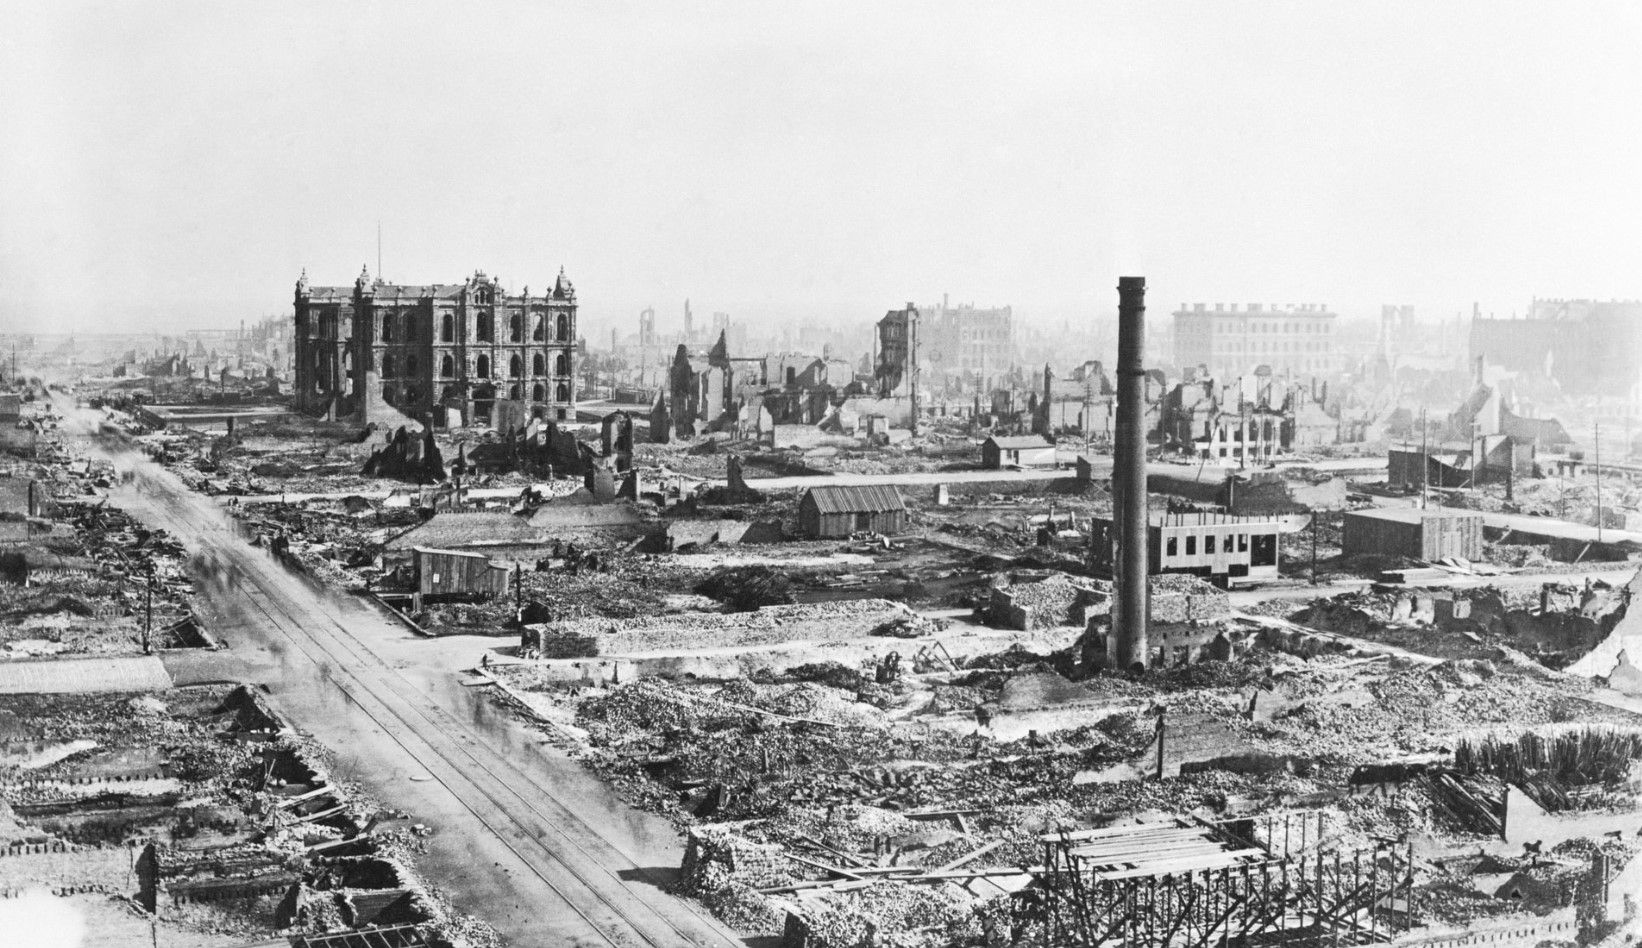 150 years ago today the Great Chicago Fire ignited